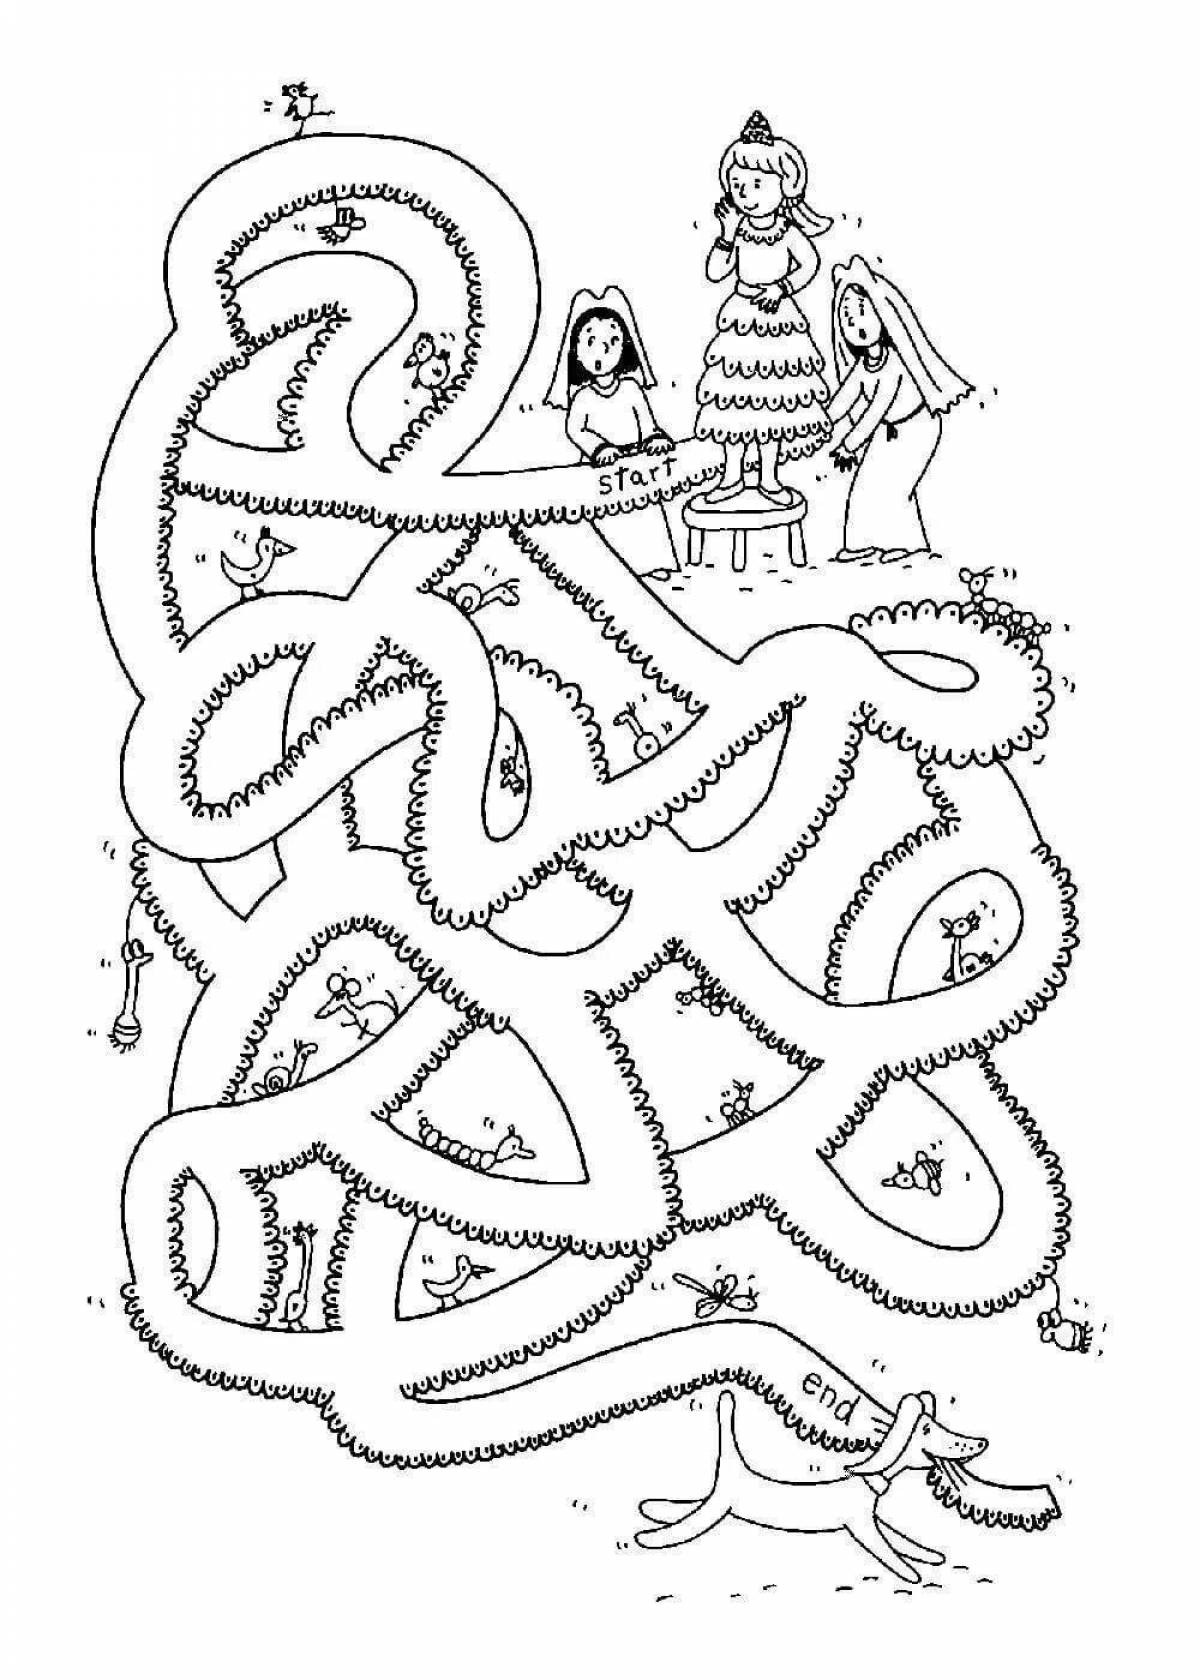 Inspirational maze coloring book for 7 year olds